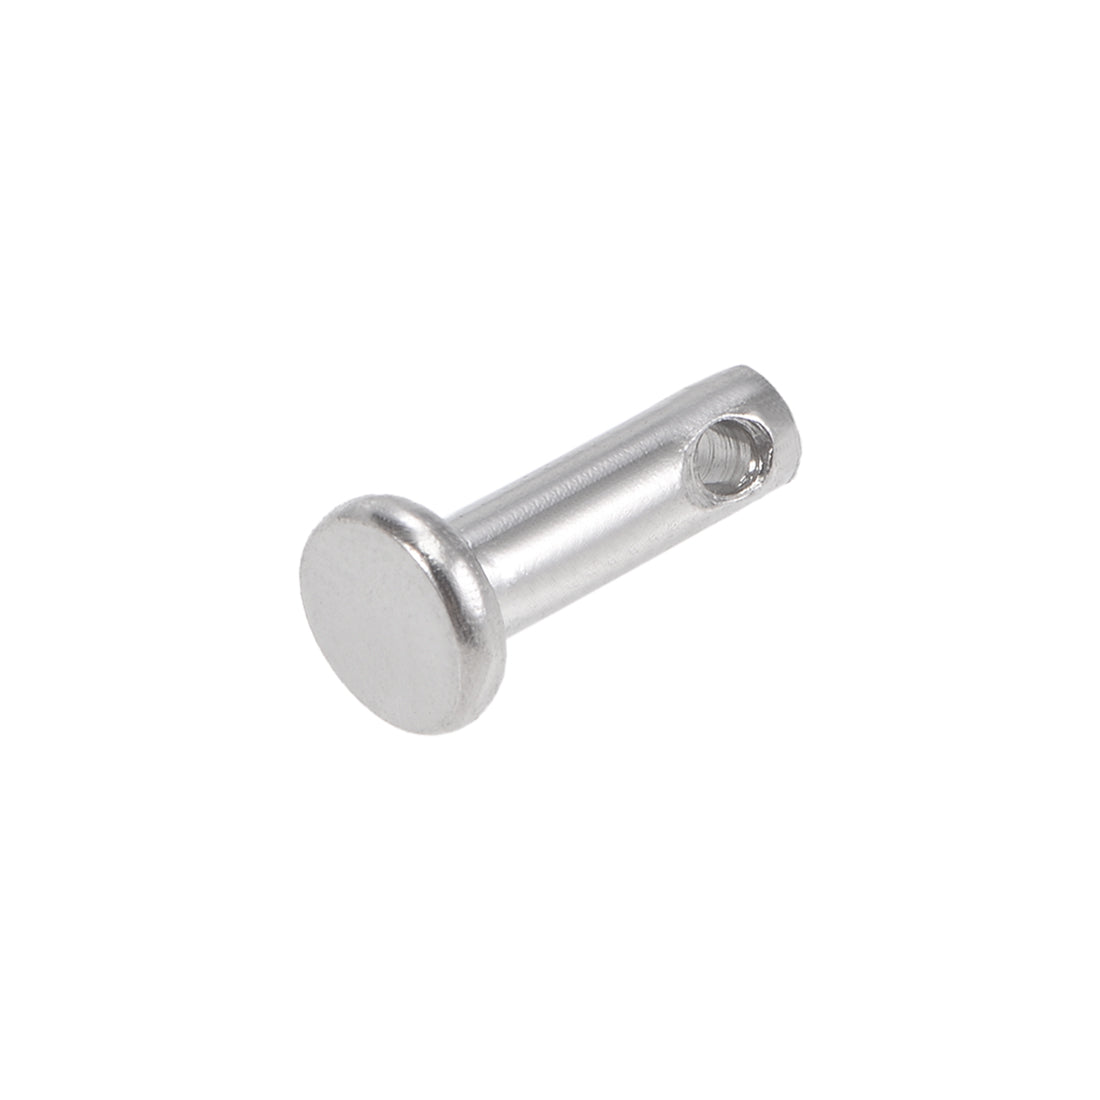 uxcell Uxcell Single Hole Clevis Pins - 3mm x 10mm Flat Head 304 Stainless Steel Link Hinge Pin 10Pcs